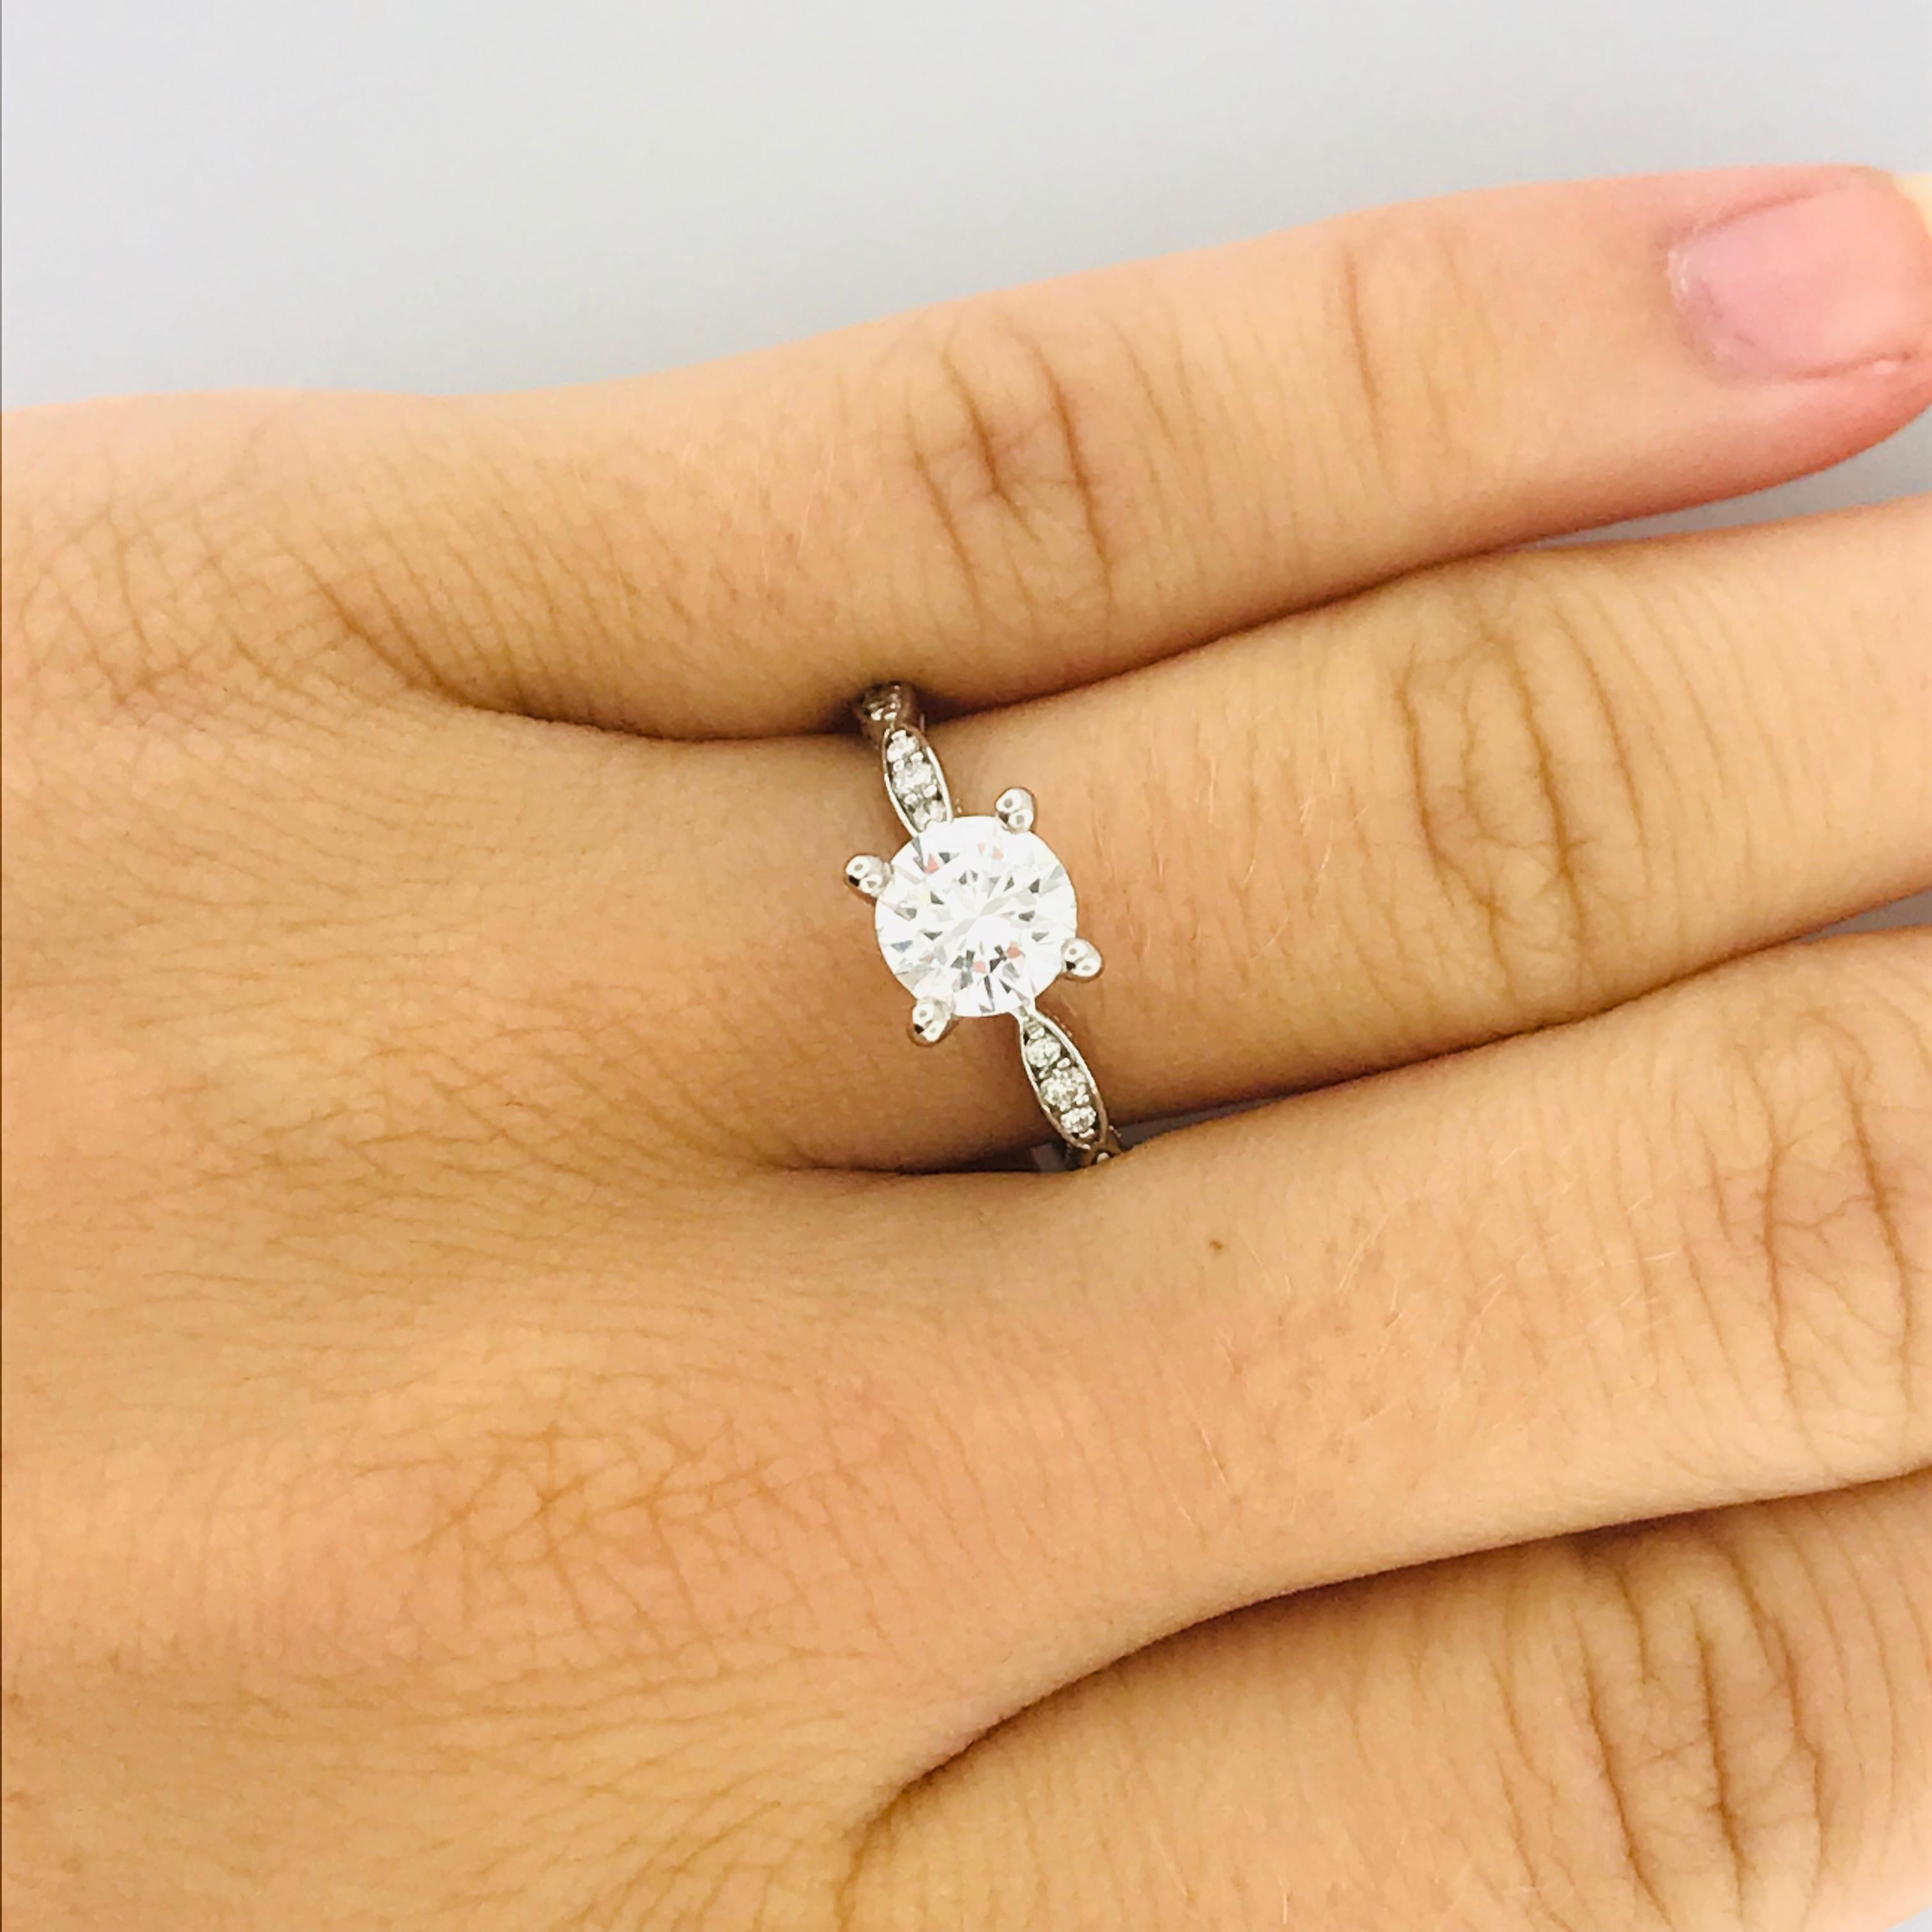 TACORI 18K WHITE GOLD ENGAGEMENT RING! This never before worn, new Tacori original engagement ring is stunning! The band is a unique piece of art itself. With a scalloped design that goes half way around the band that has been paved with diamonds.